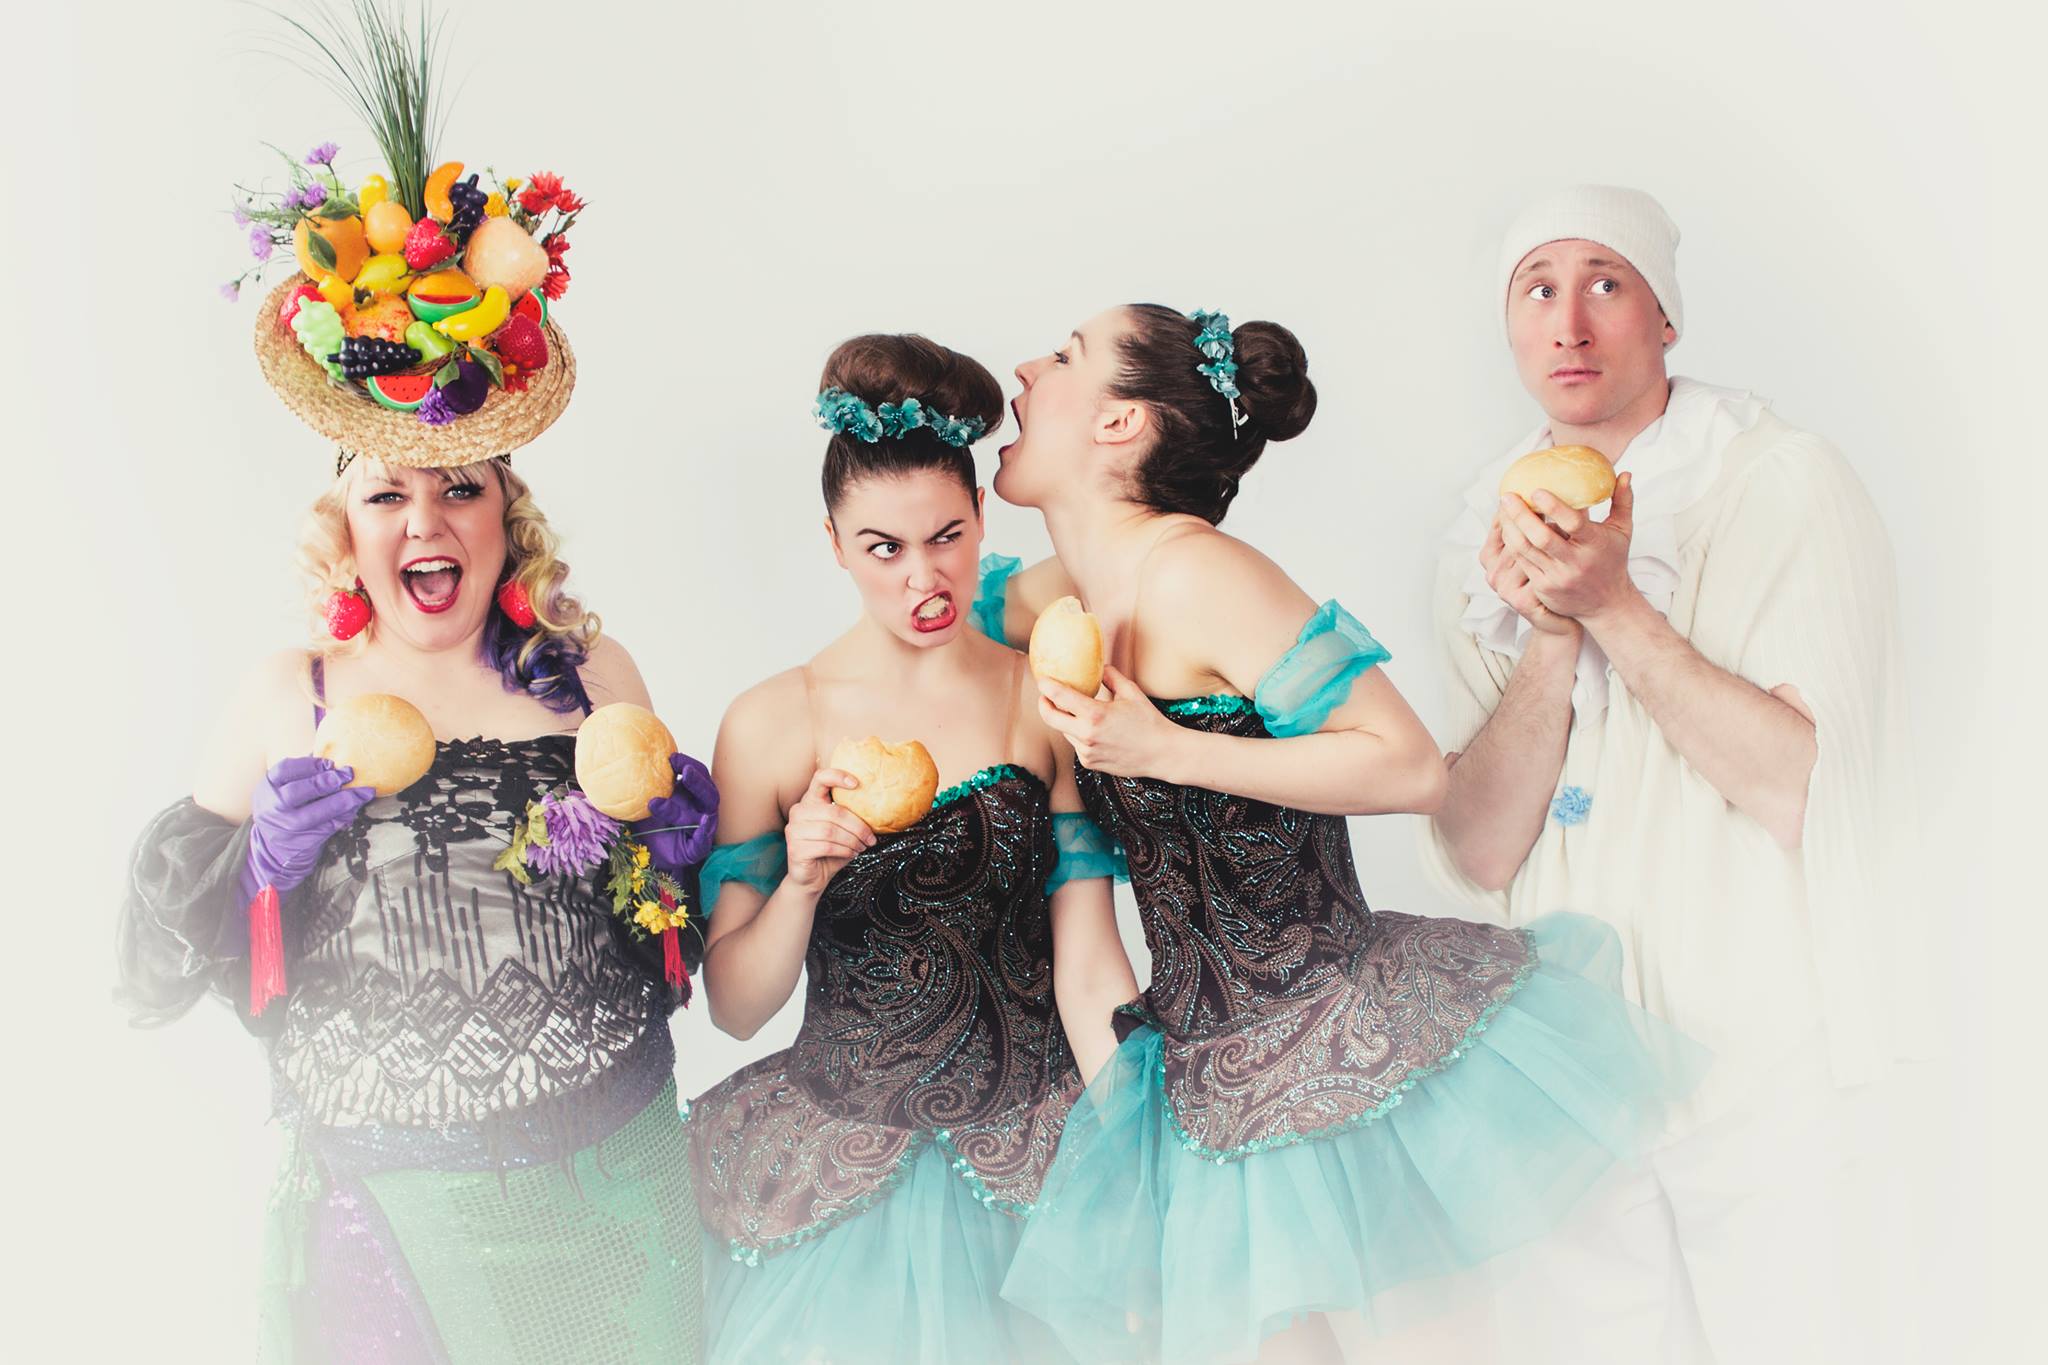 Clown around with Les Bunheads & Friends